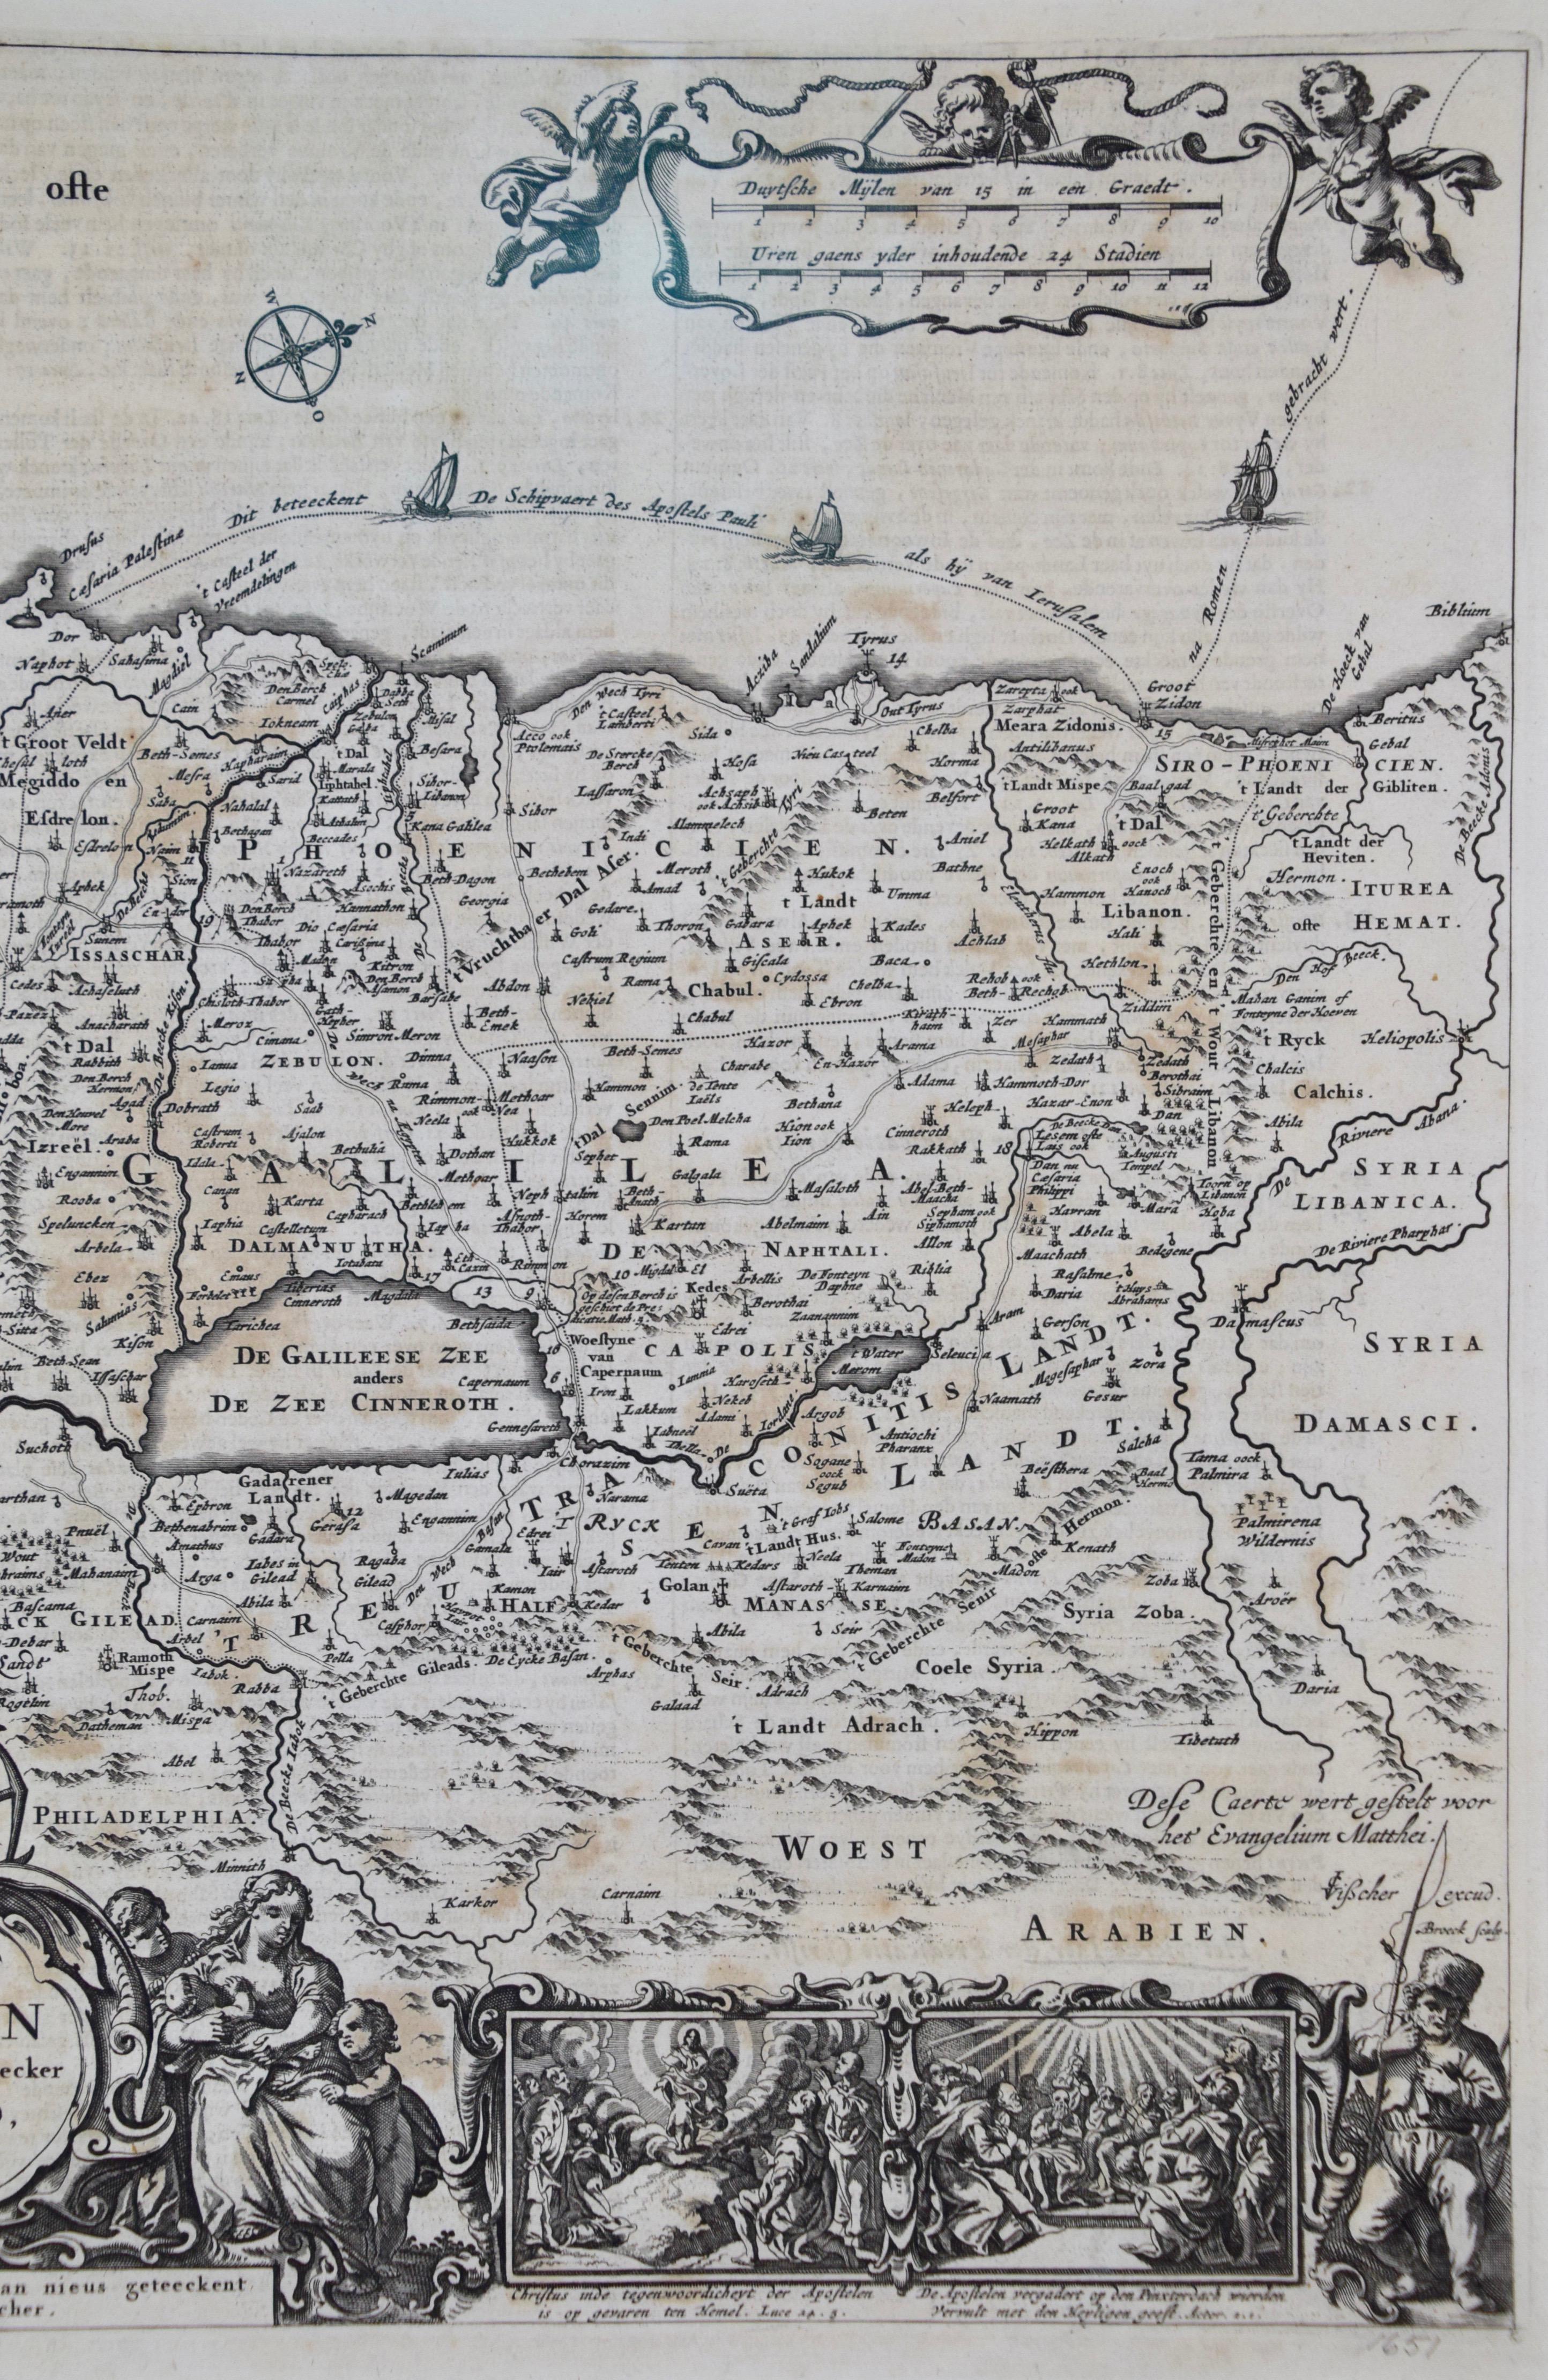 The Holy Land at the Time of Jesus: A 17th Century Dutch Map by Visscher For Sale 5